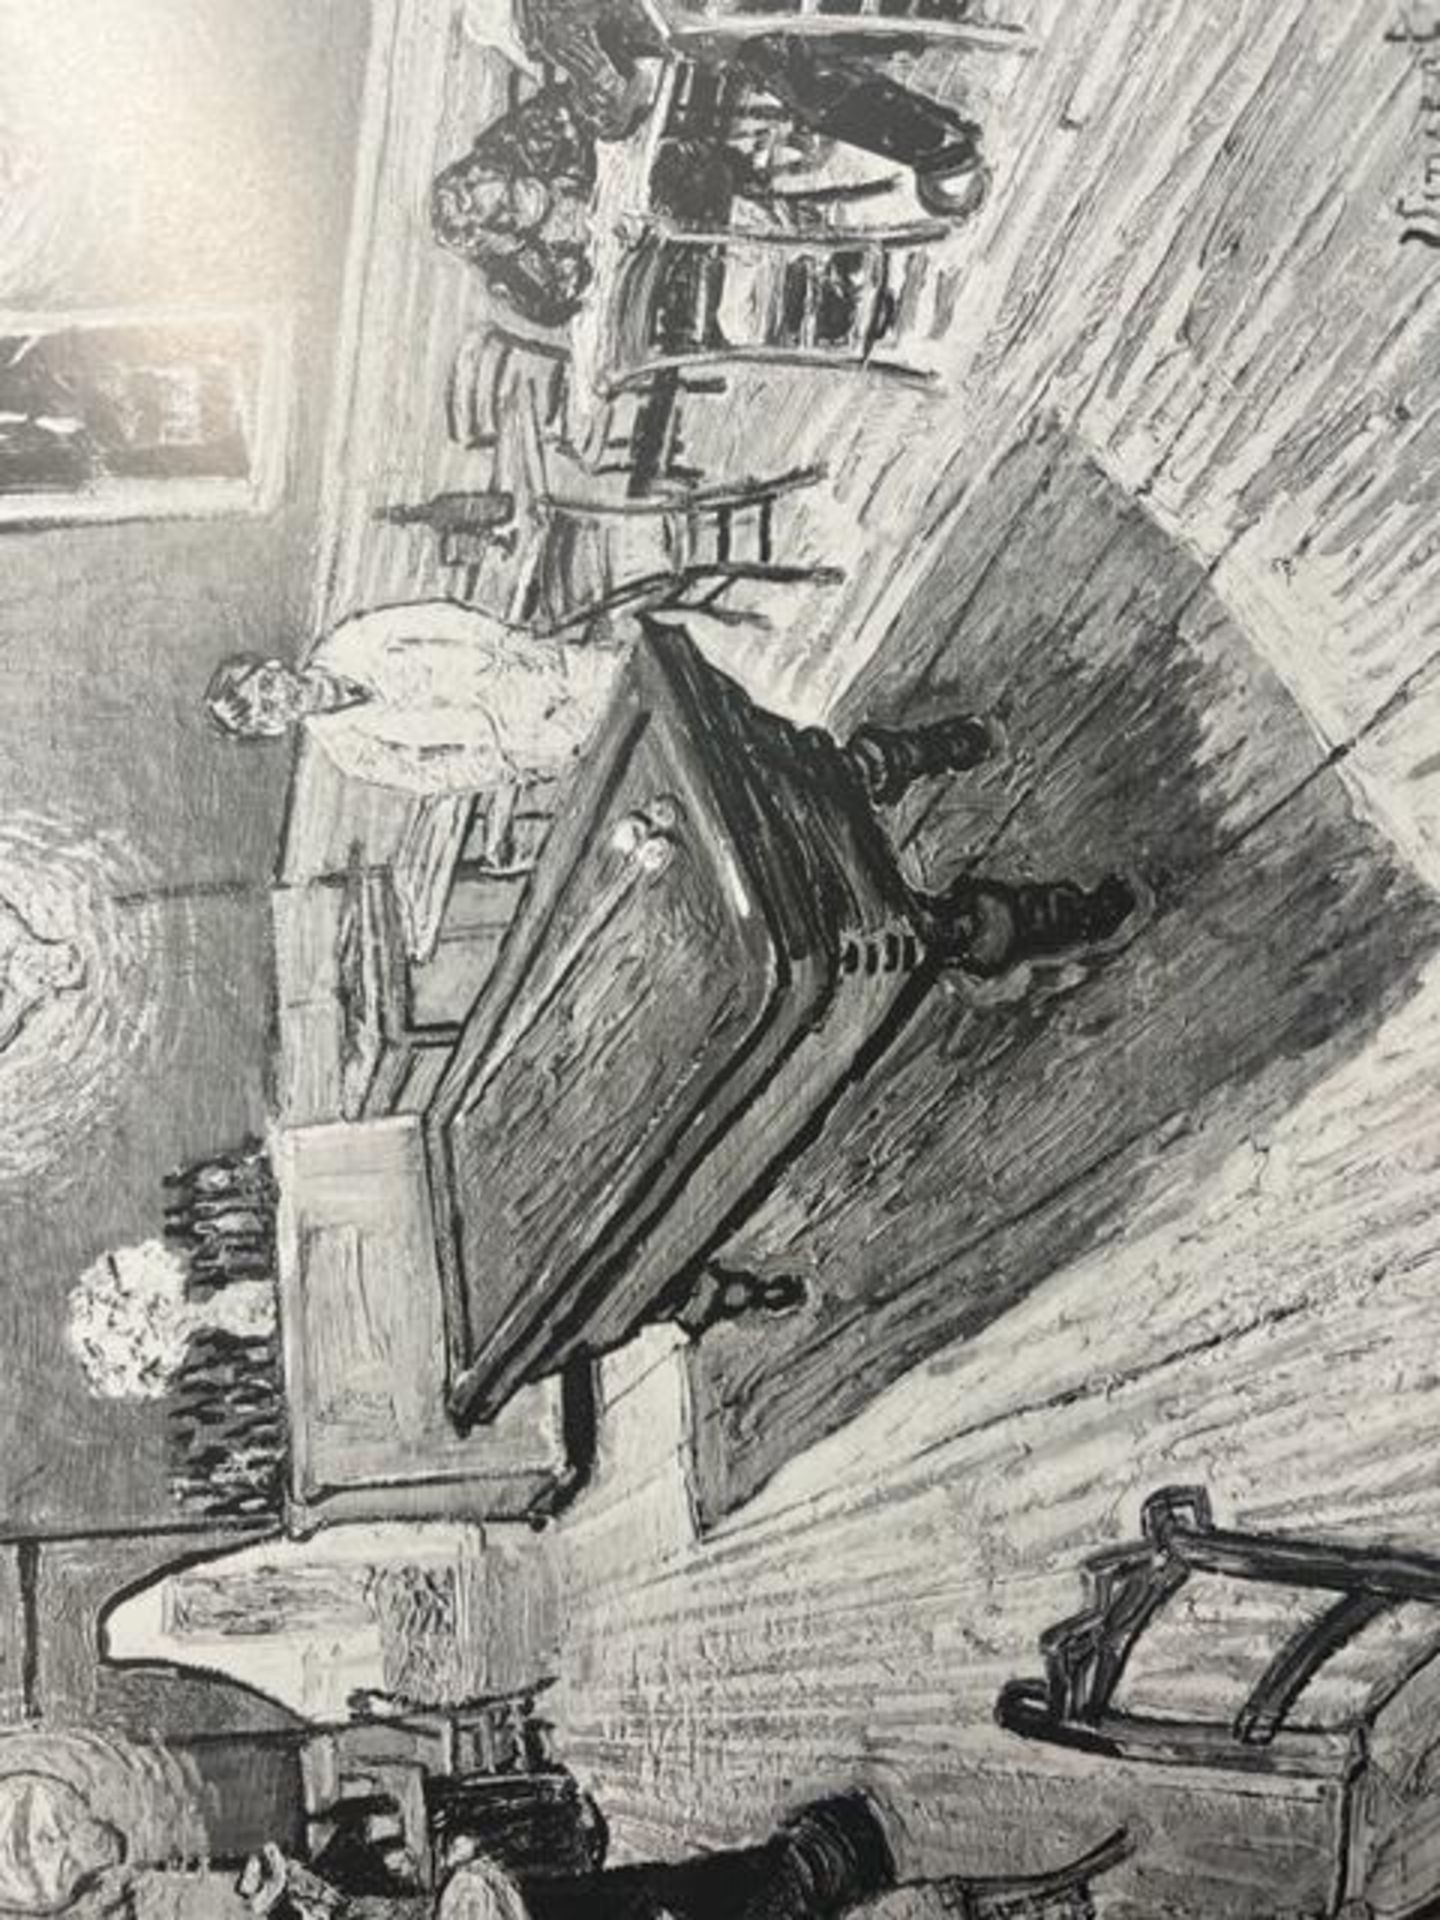 Vincent van Gogh "The Night Cafe" Print. - Image 2 of 6